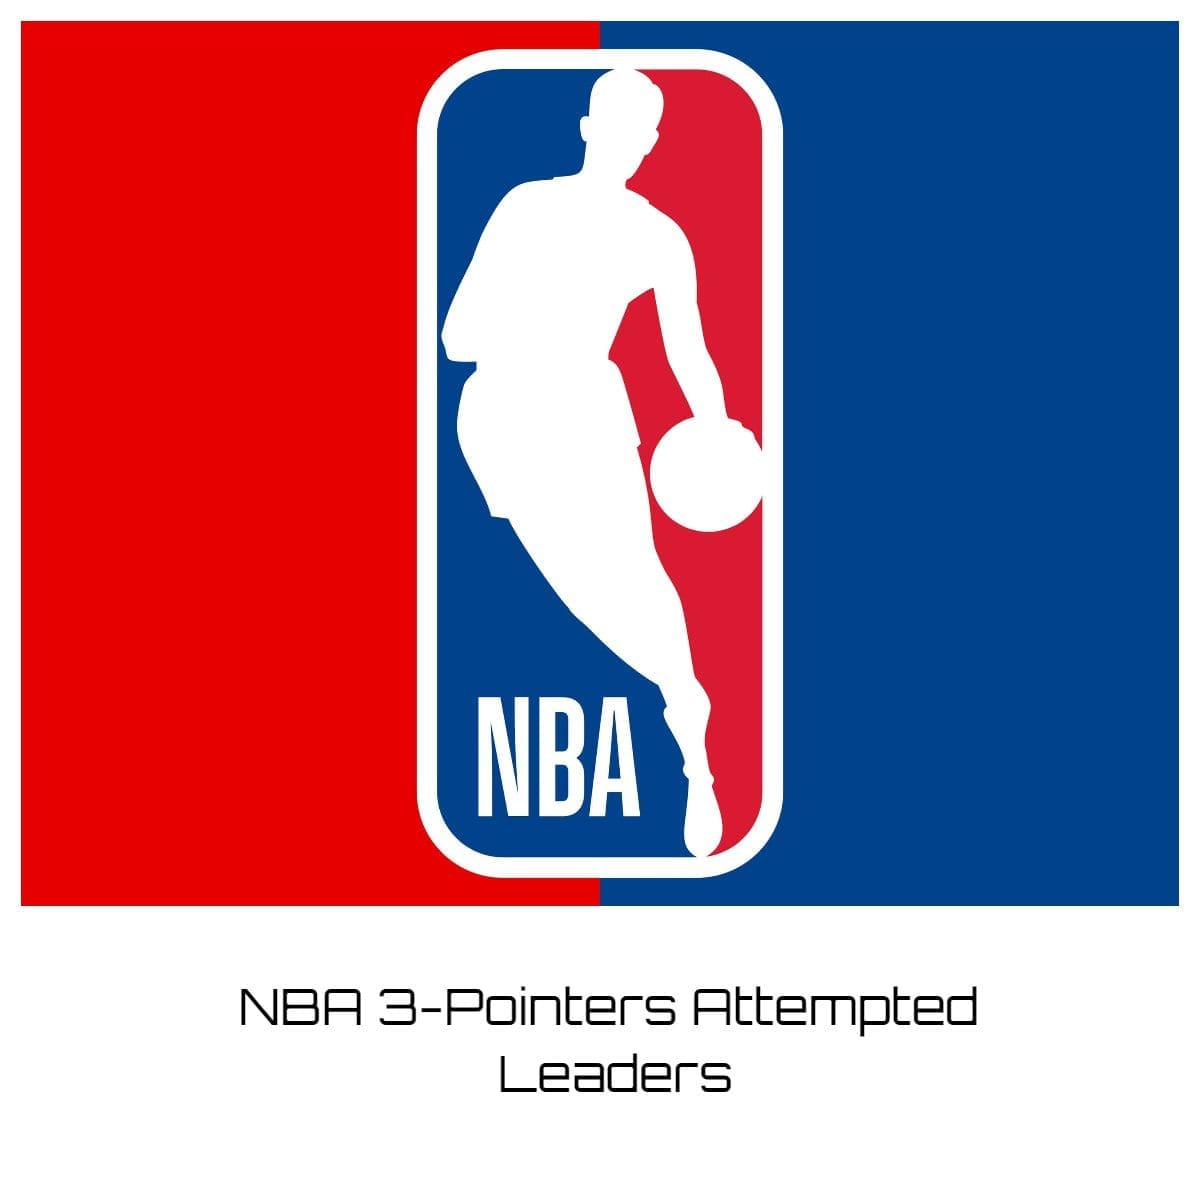 NBA 3-Pointers Attempted Leaders